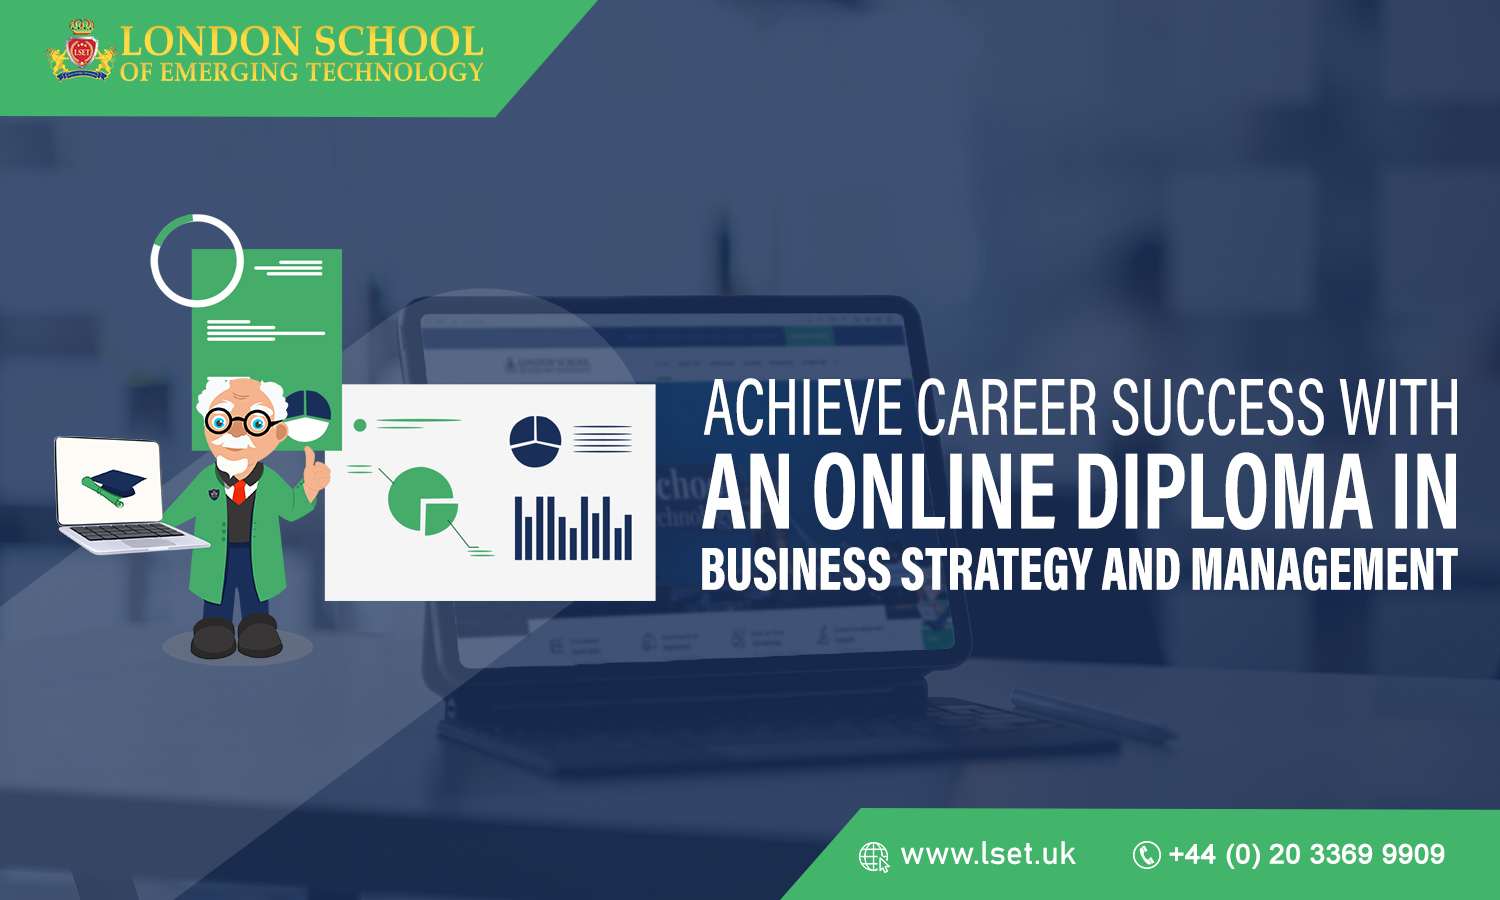 Achieve Career Success with an Online Diploma in Business Strategy and Management